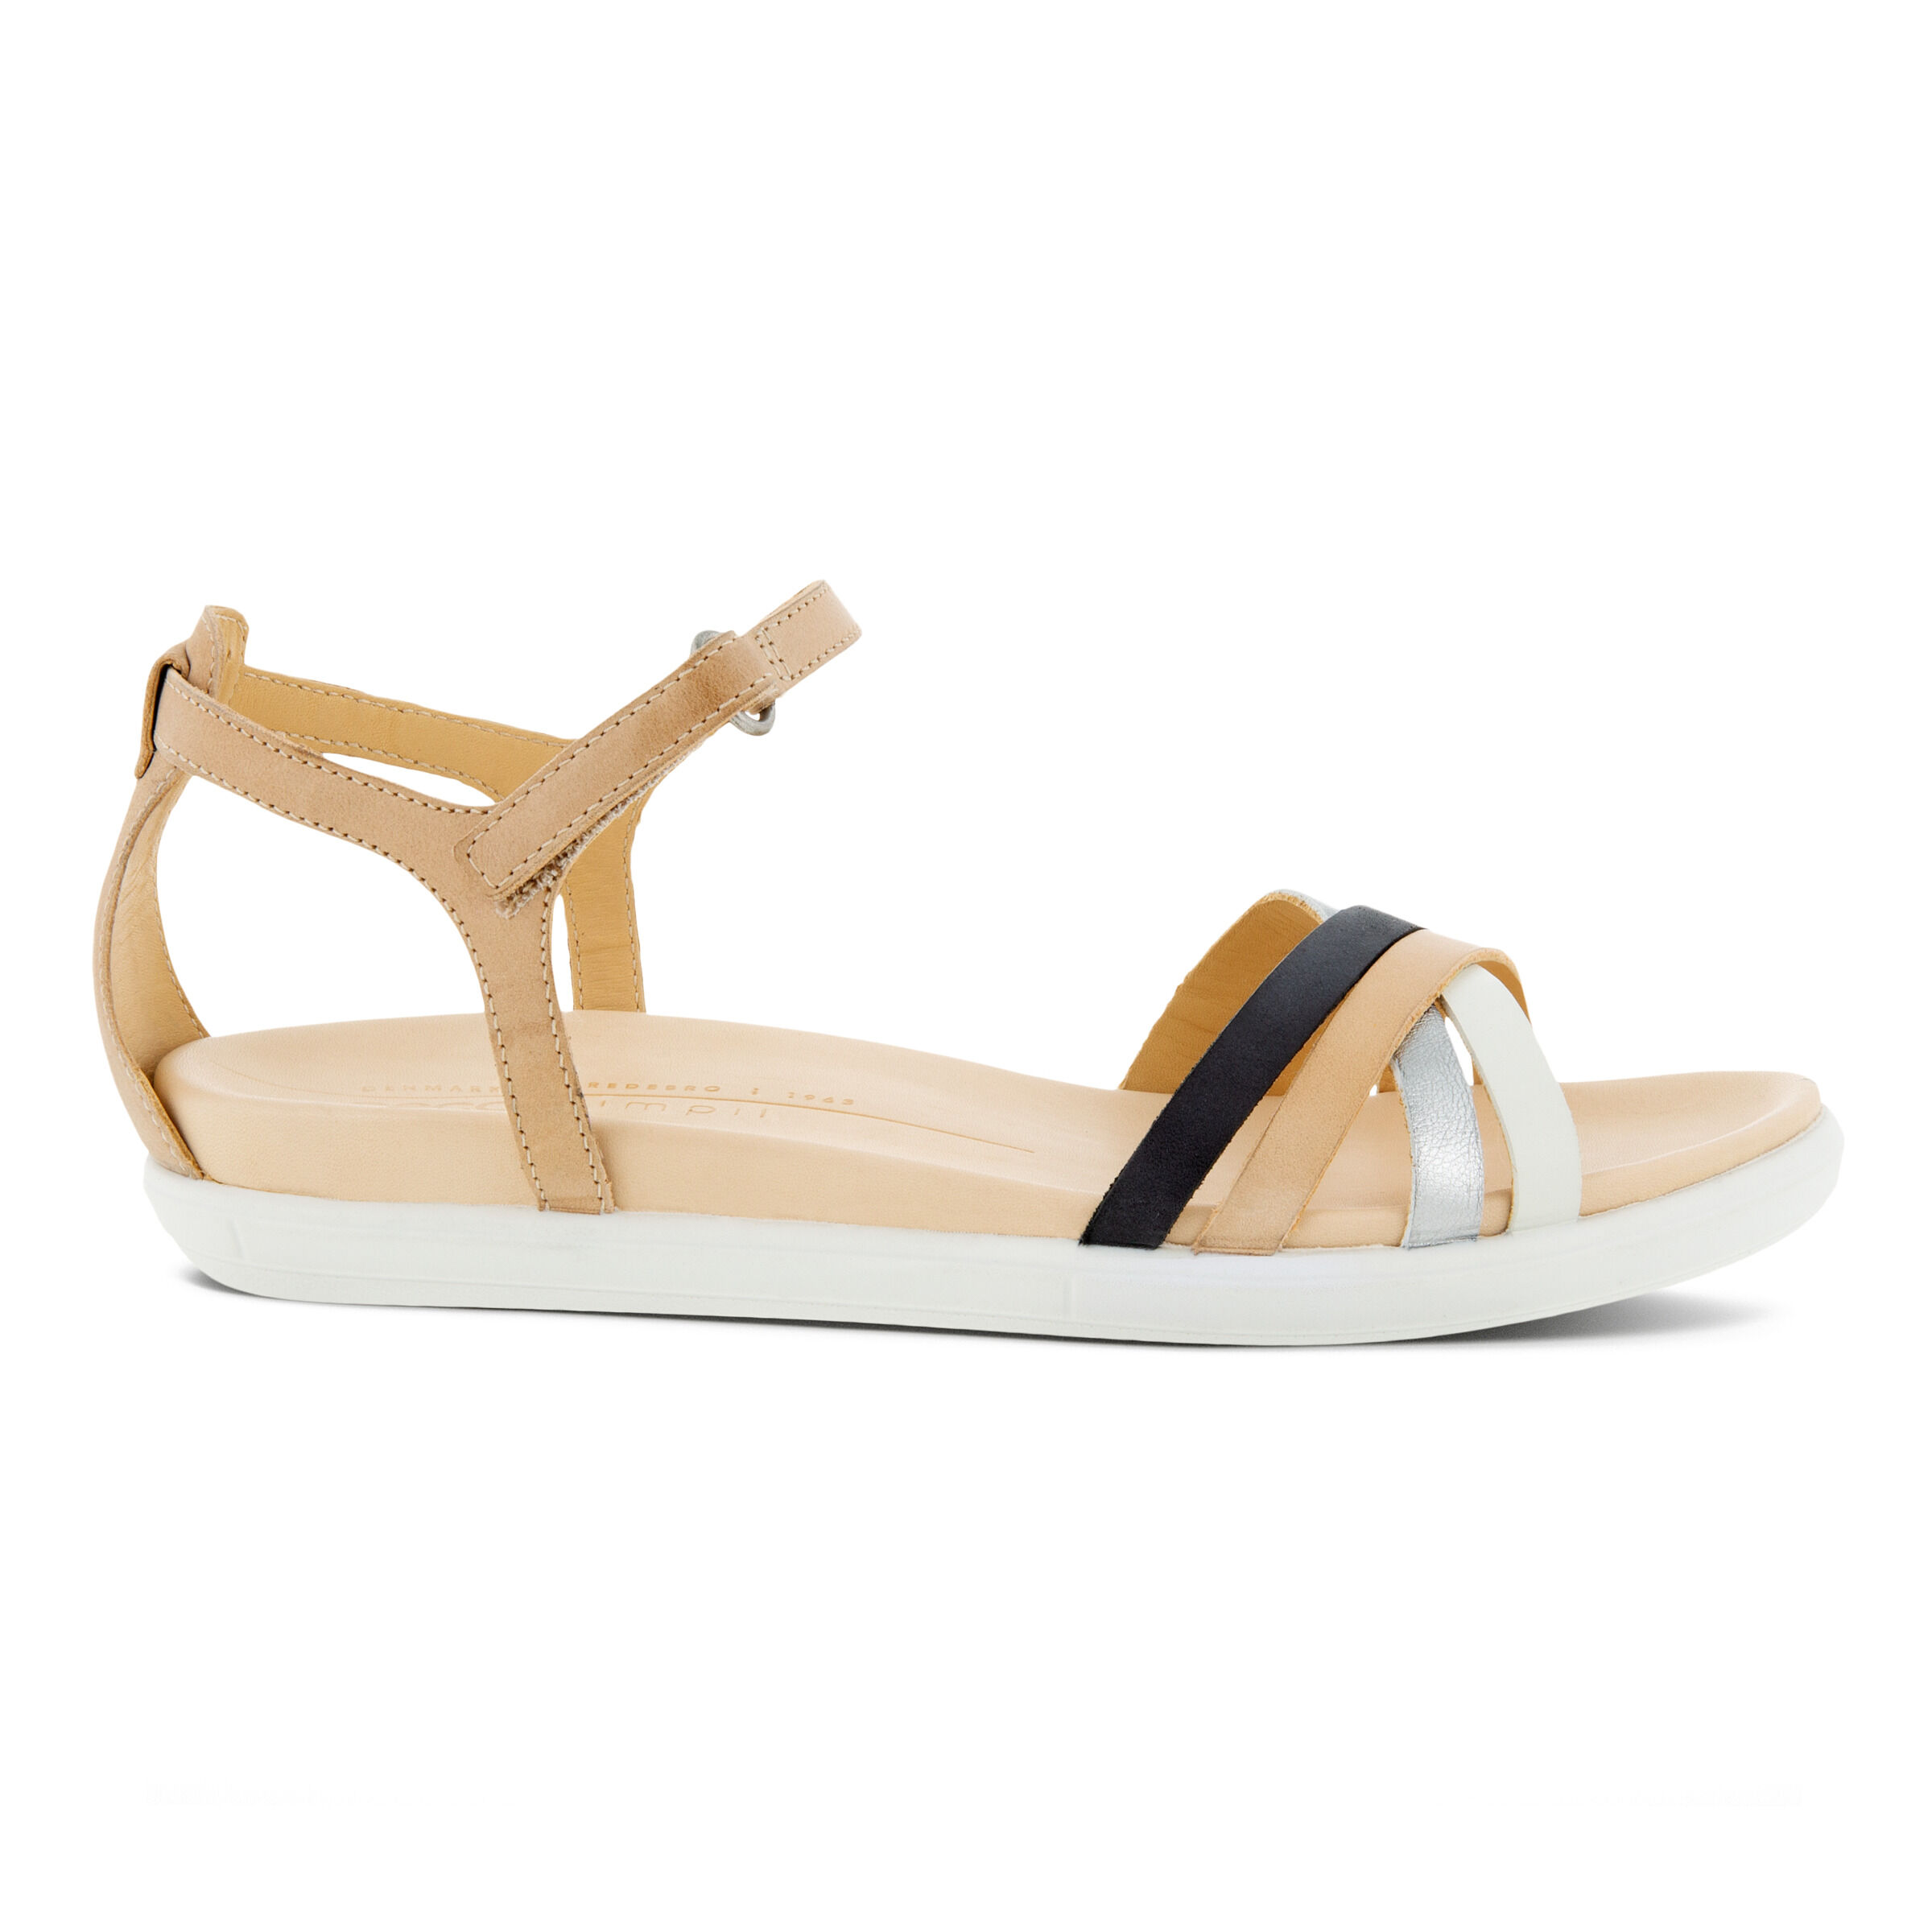 Ecco Sandals For Women Shop, 41% OFF | www.ilpungolo.org